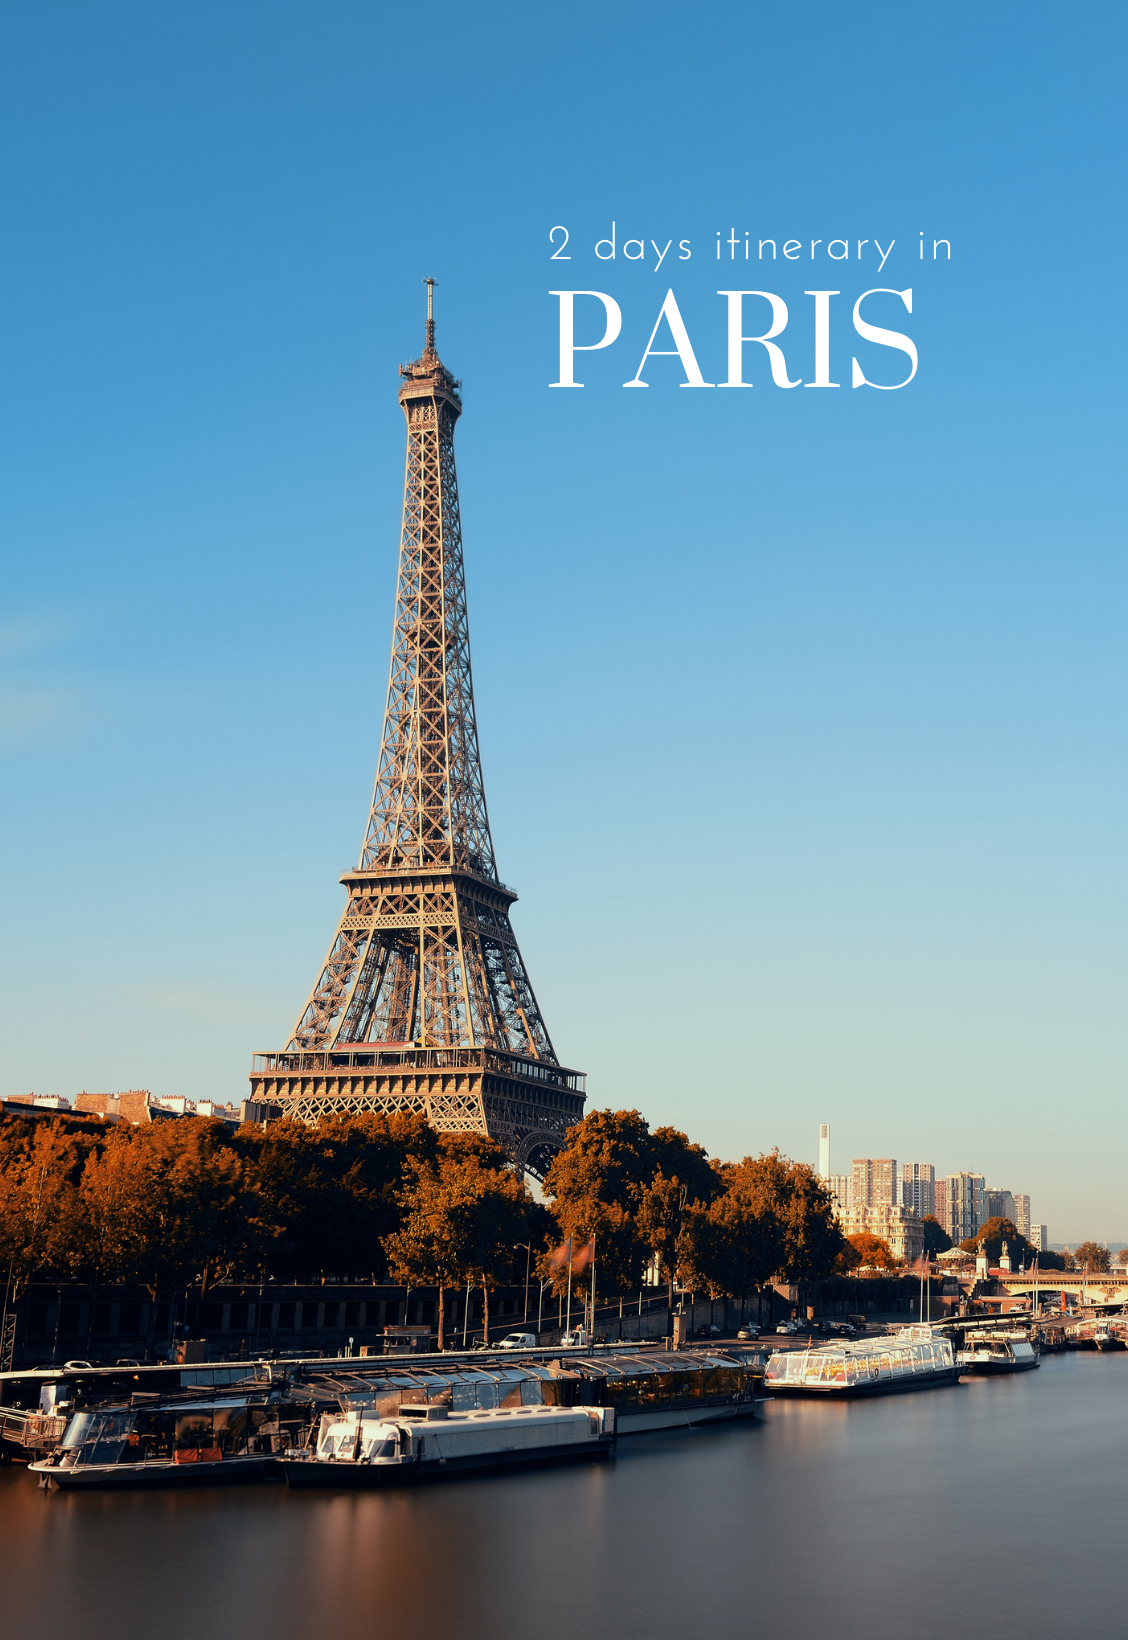 2 days itinerary in Paris